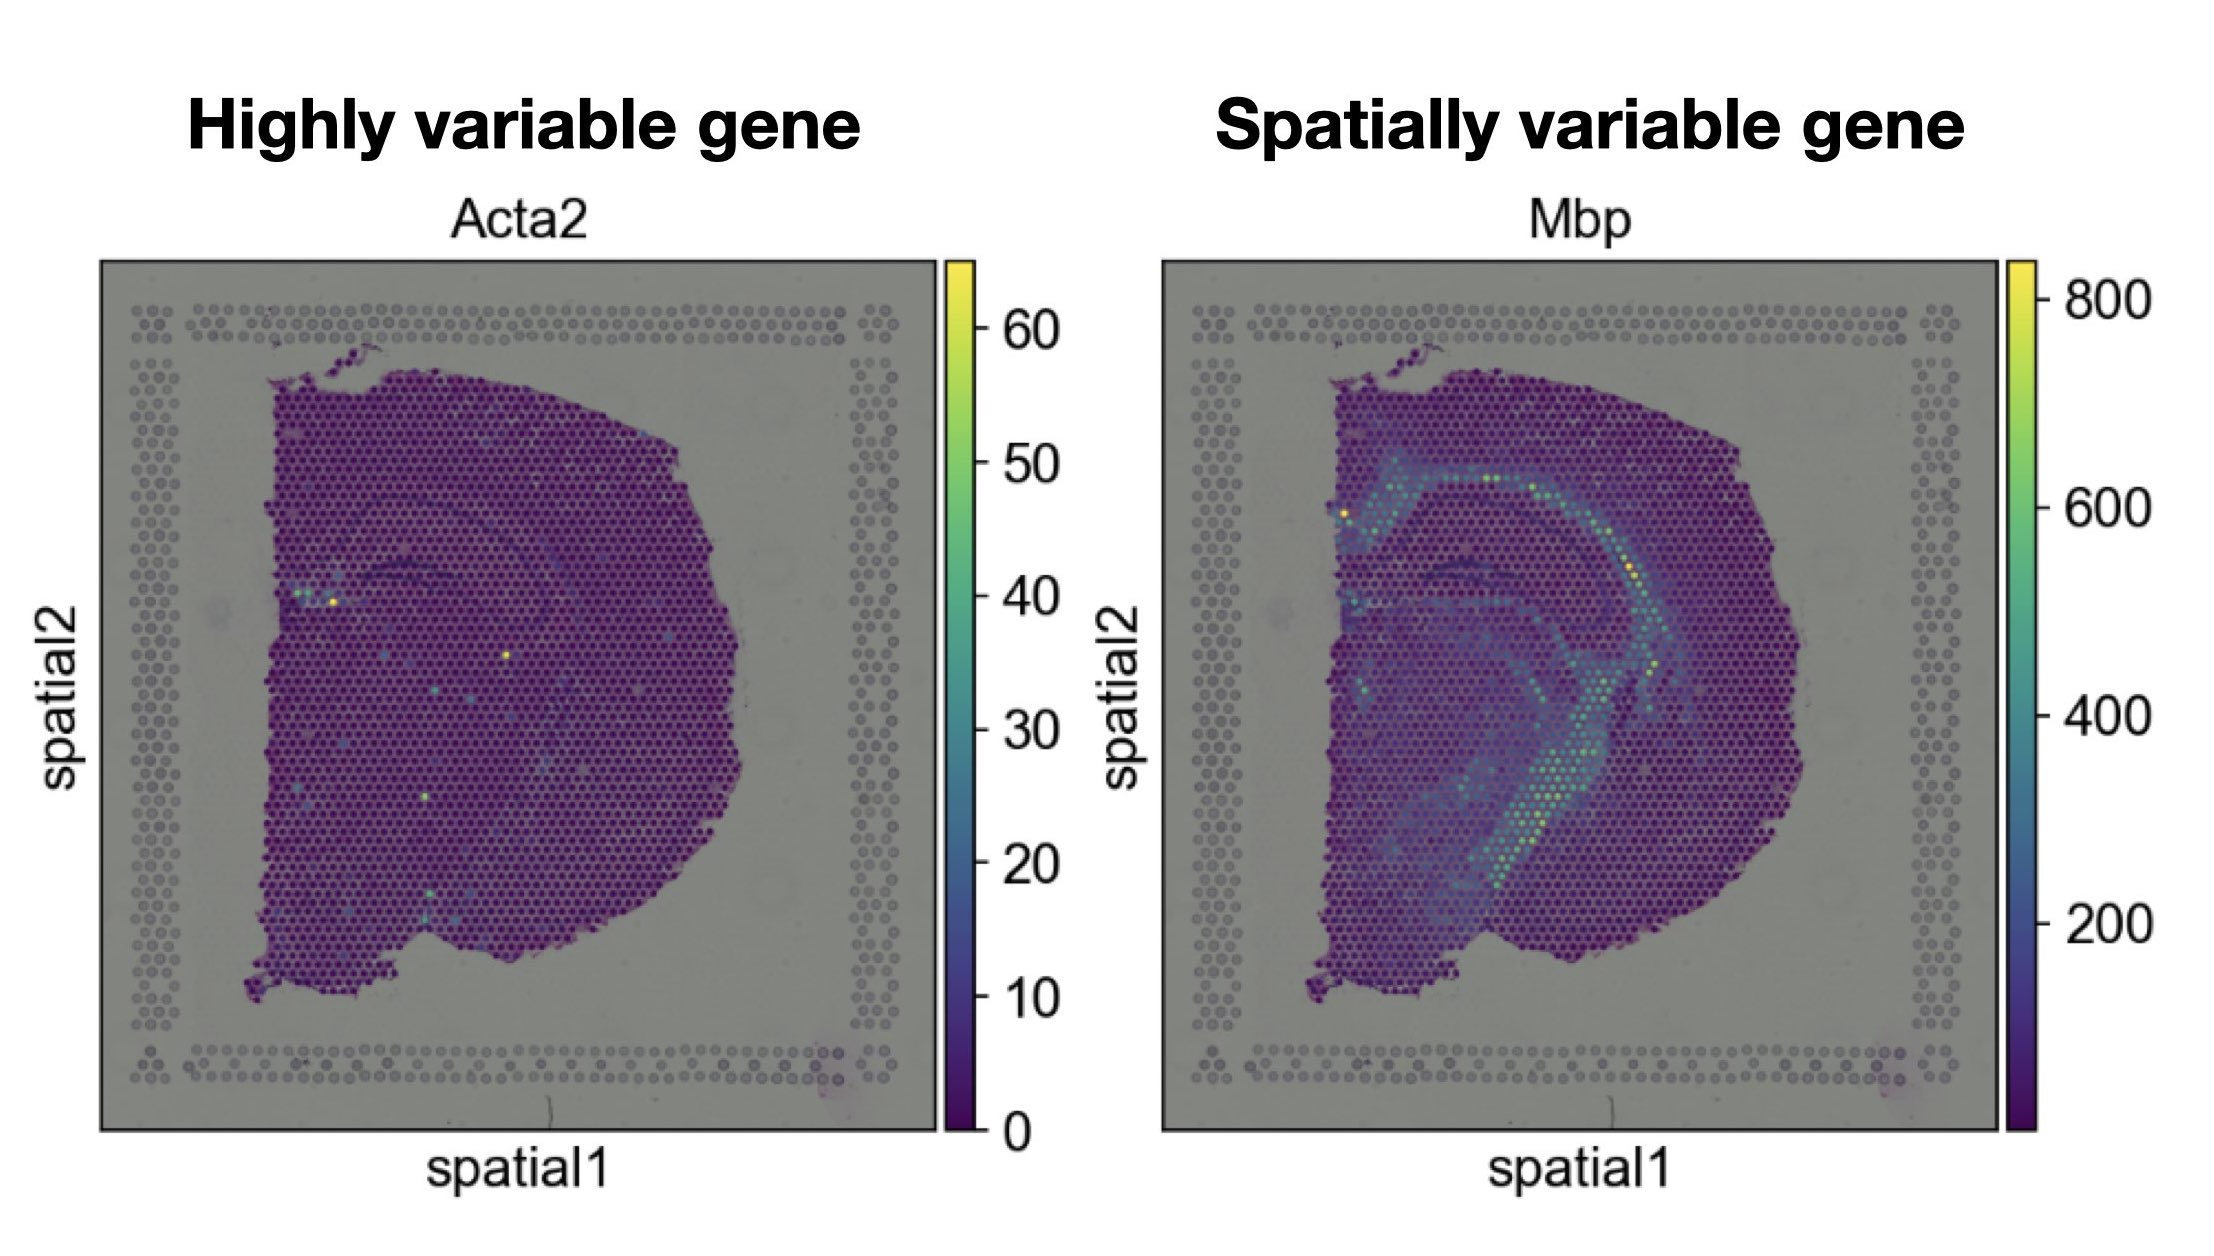 Difference highly variable gene versus spatially variable gene